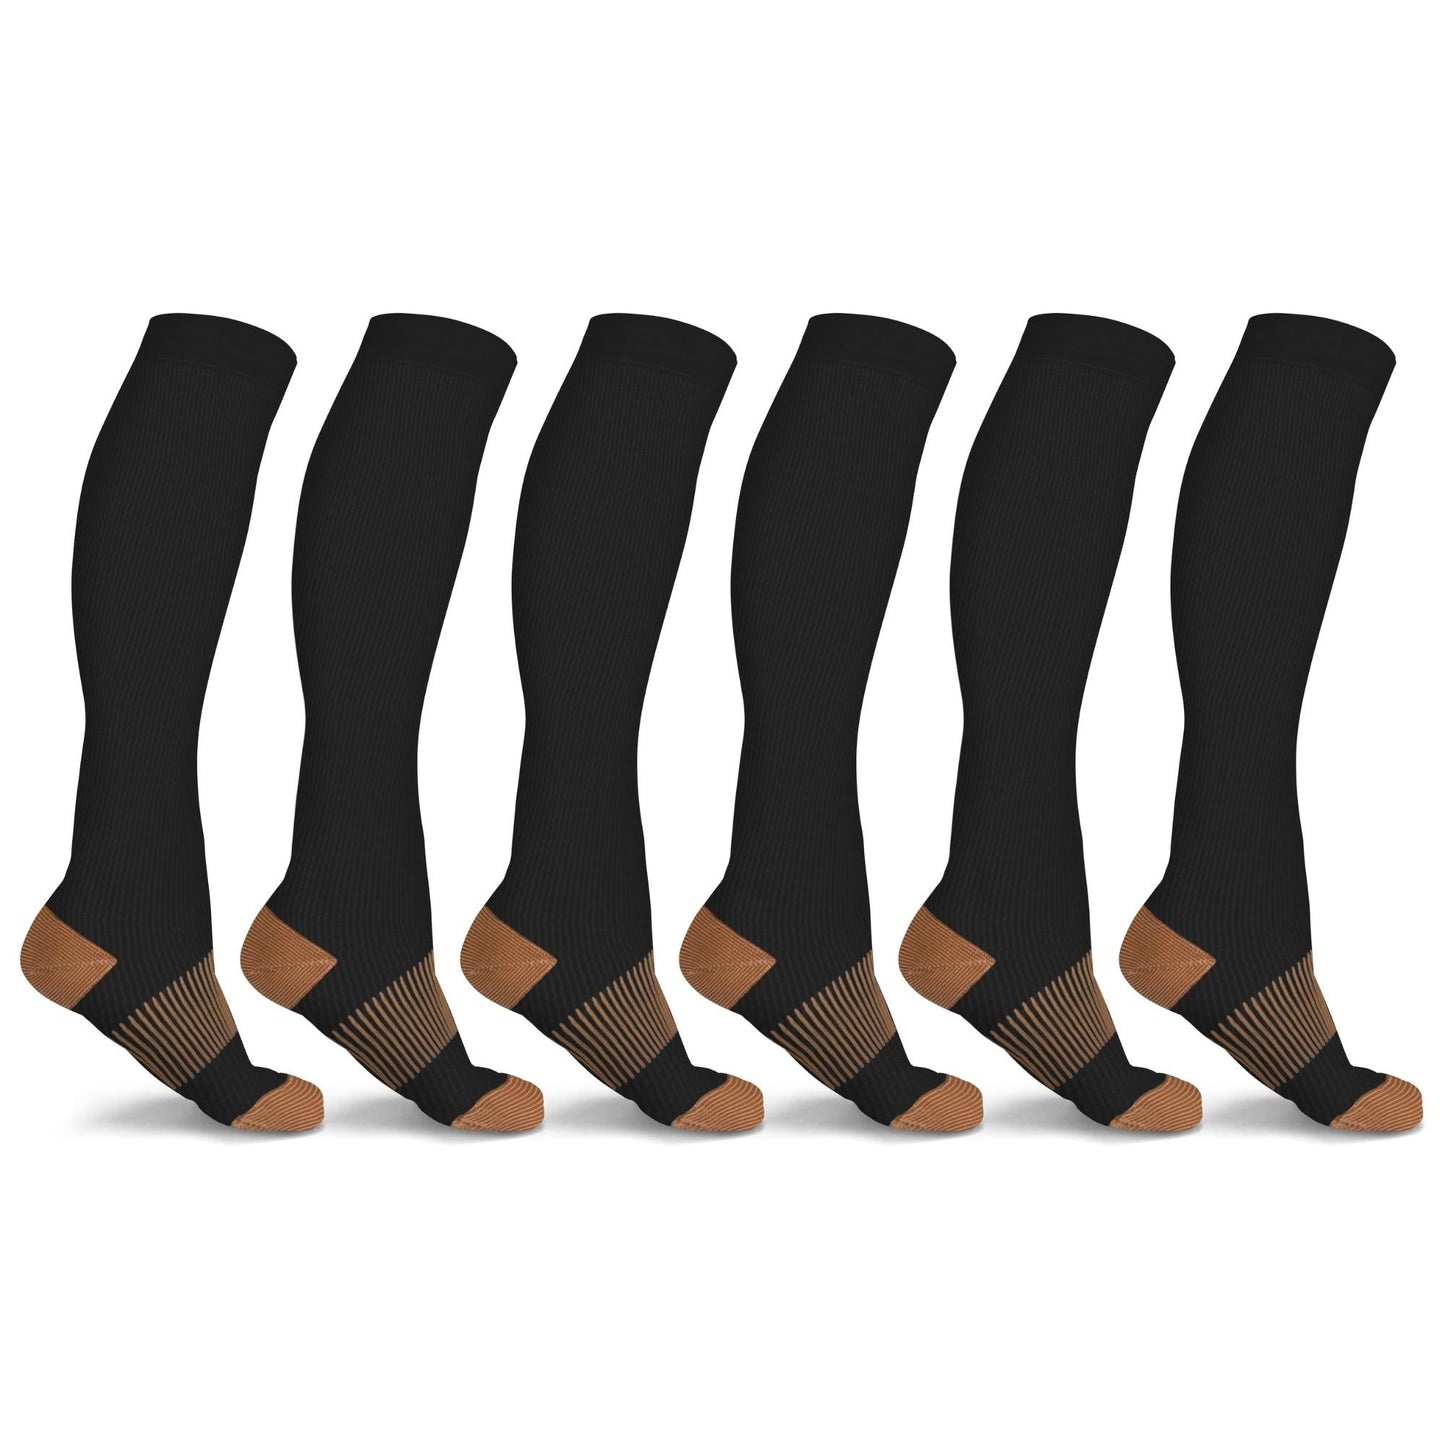 xFit Solid Copper-Infused Knee-High Compression Socks (6 Pairs